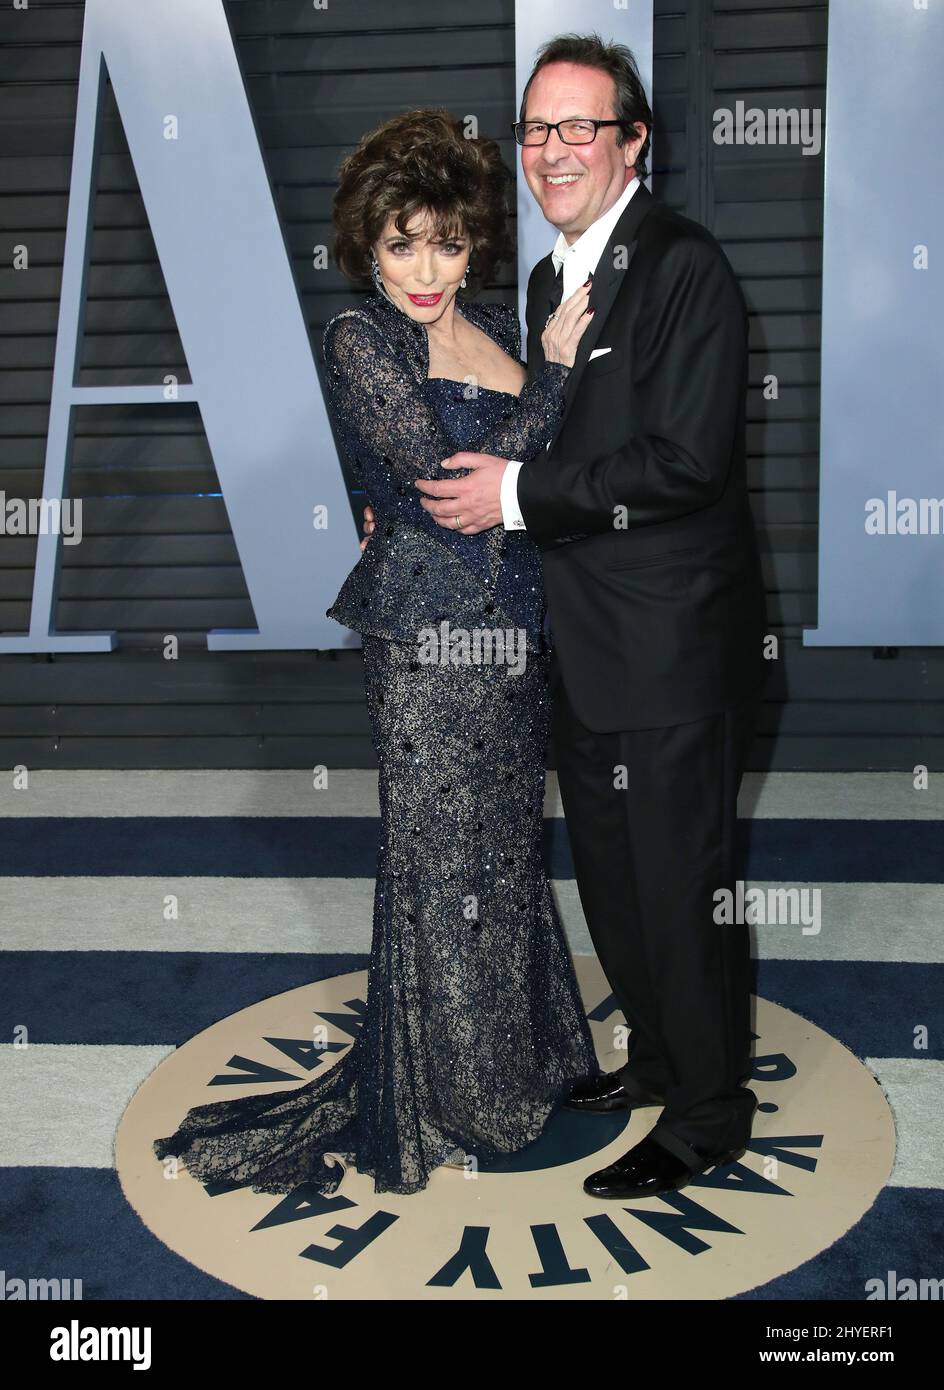 Joan Collins, Percy Gibson bei der Vanity Fair Oscar Party in Beverly Hills, Los Angeles, USA Stockfoto